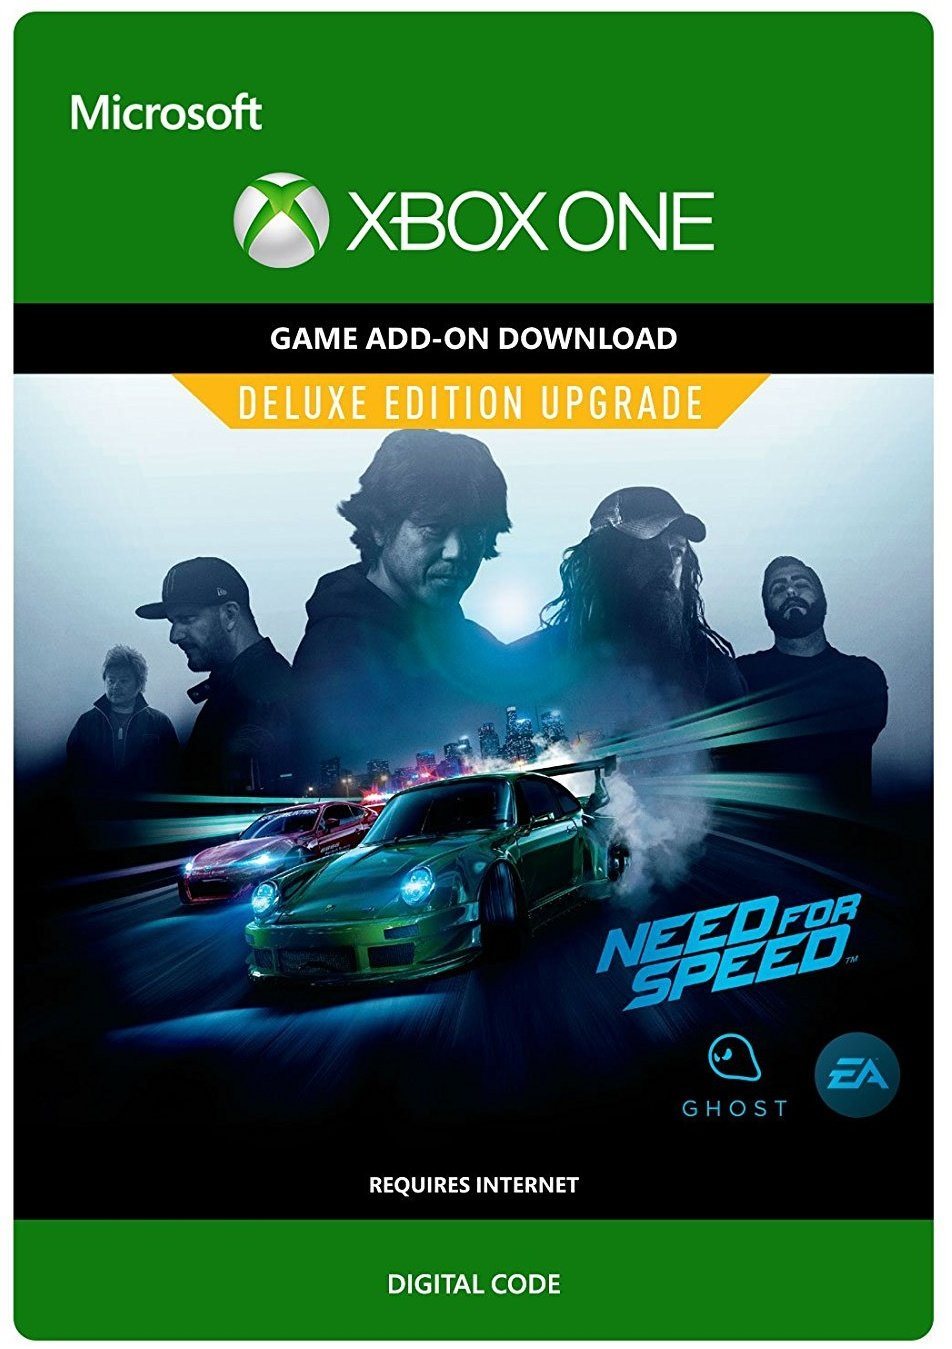 Need for Speed: Deluxe Edition Upgrade - Xbox Digital